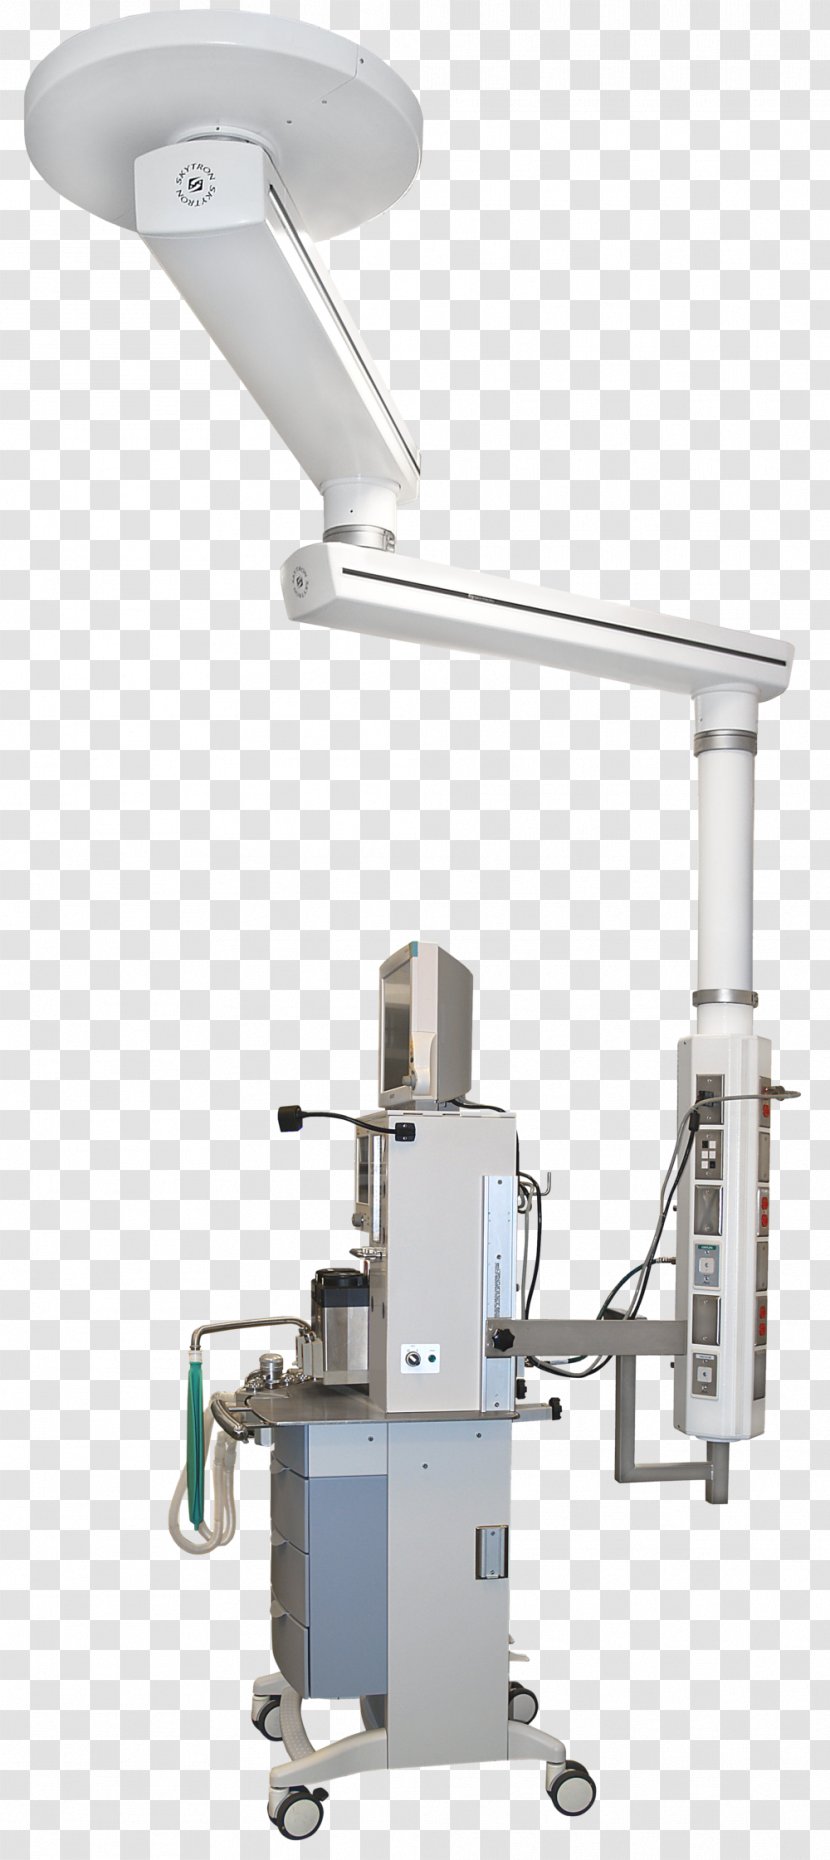 Anesthesia Anaesthetic Machine Medical Equipment Intensive Care Unit Cath Lab - Maquet - Anesthetic Transparent PNG